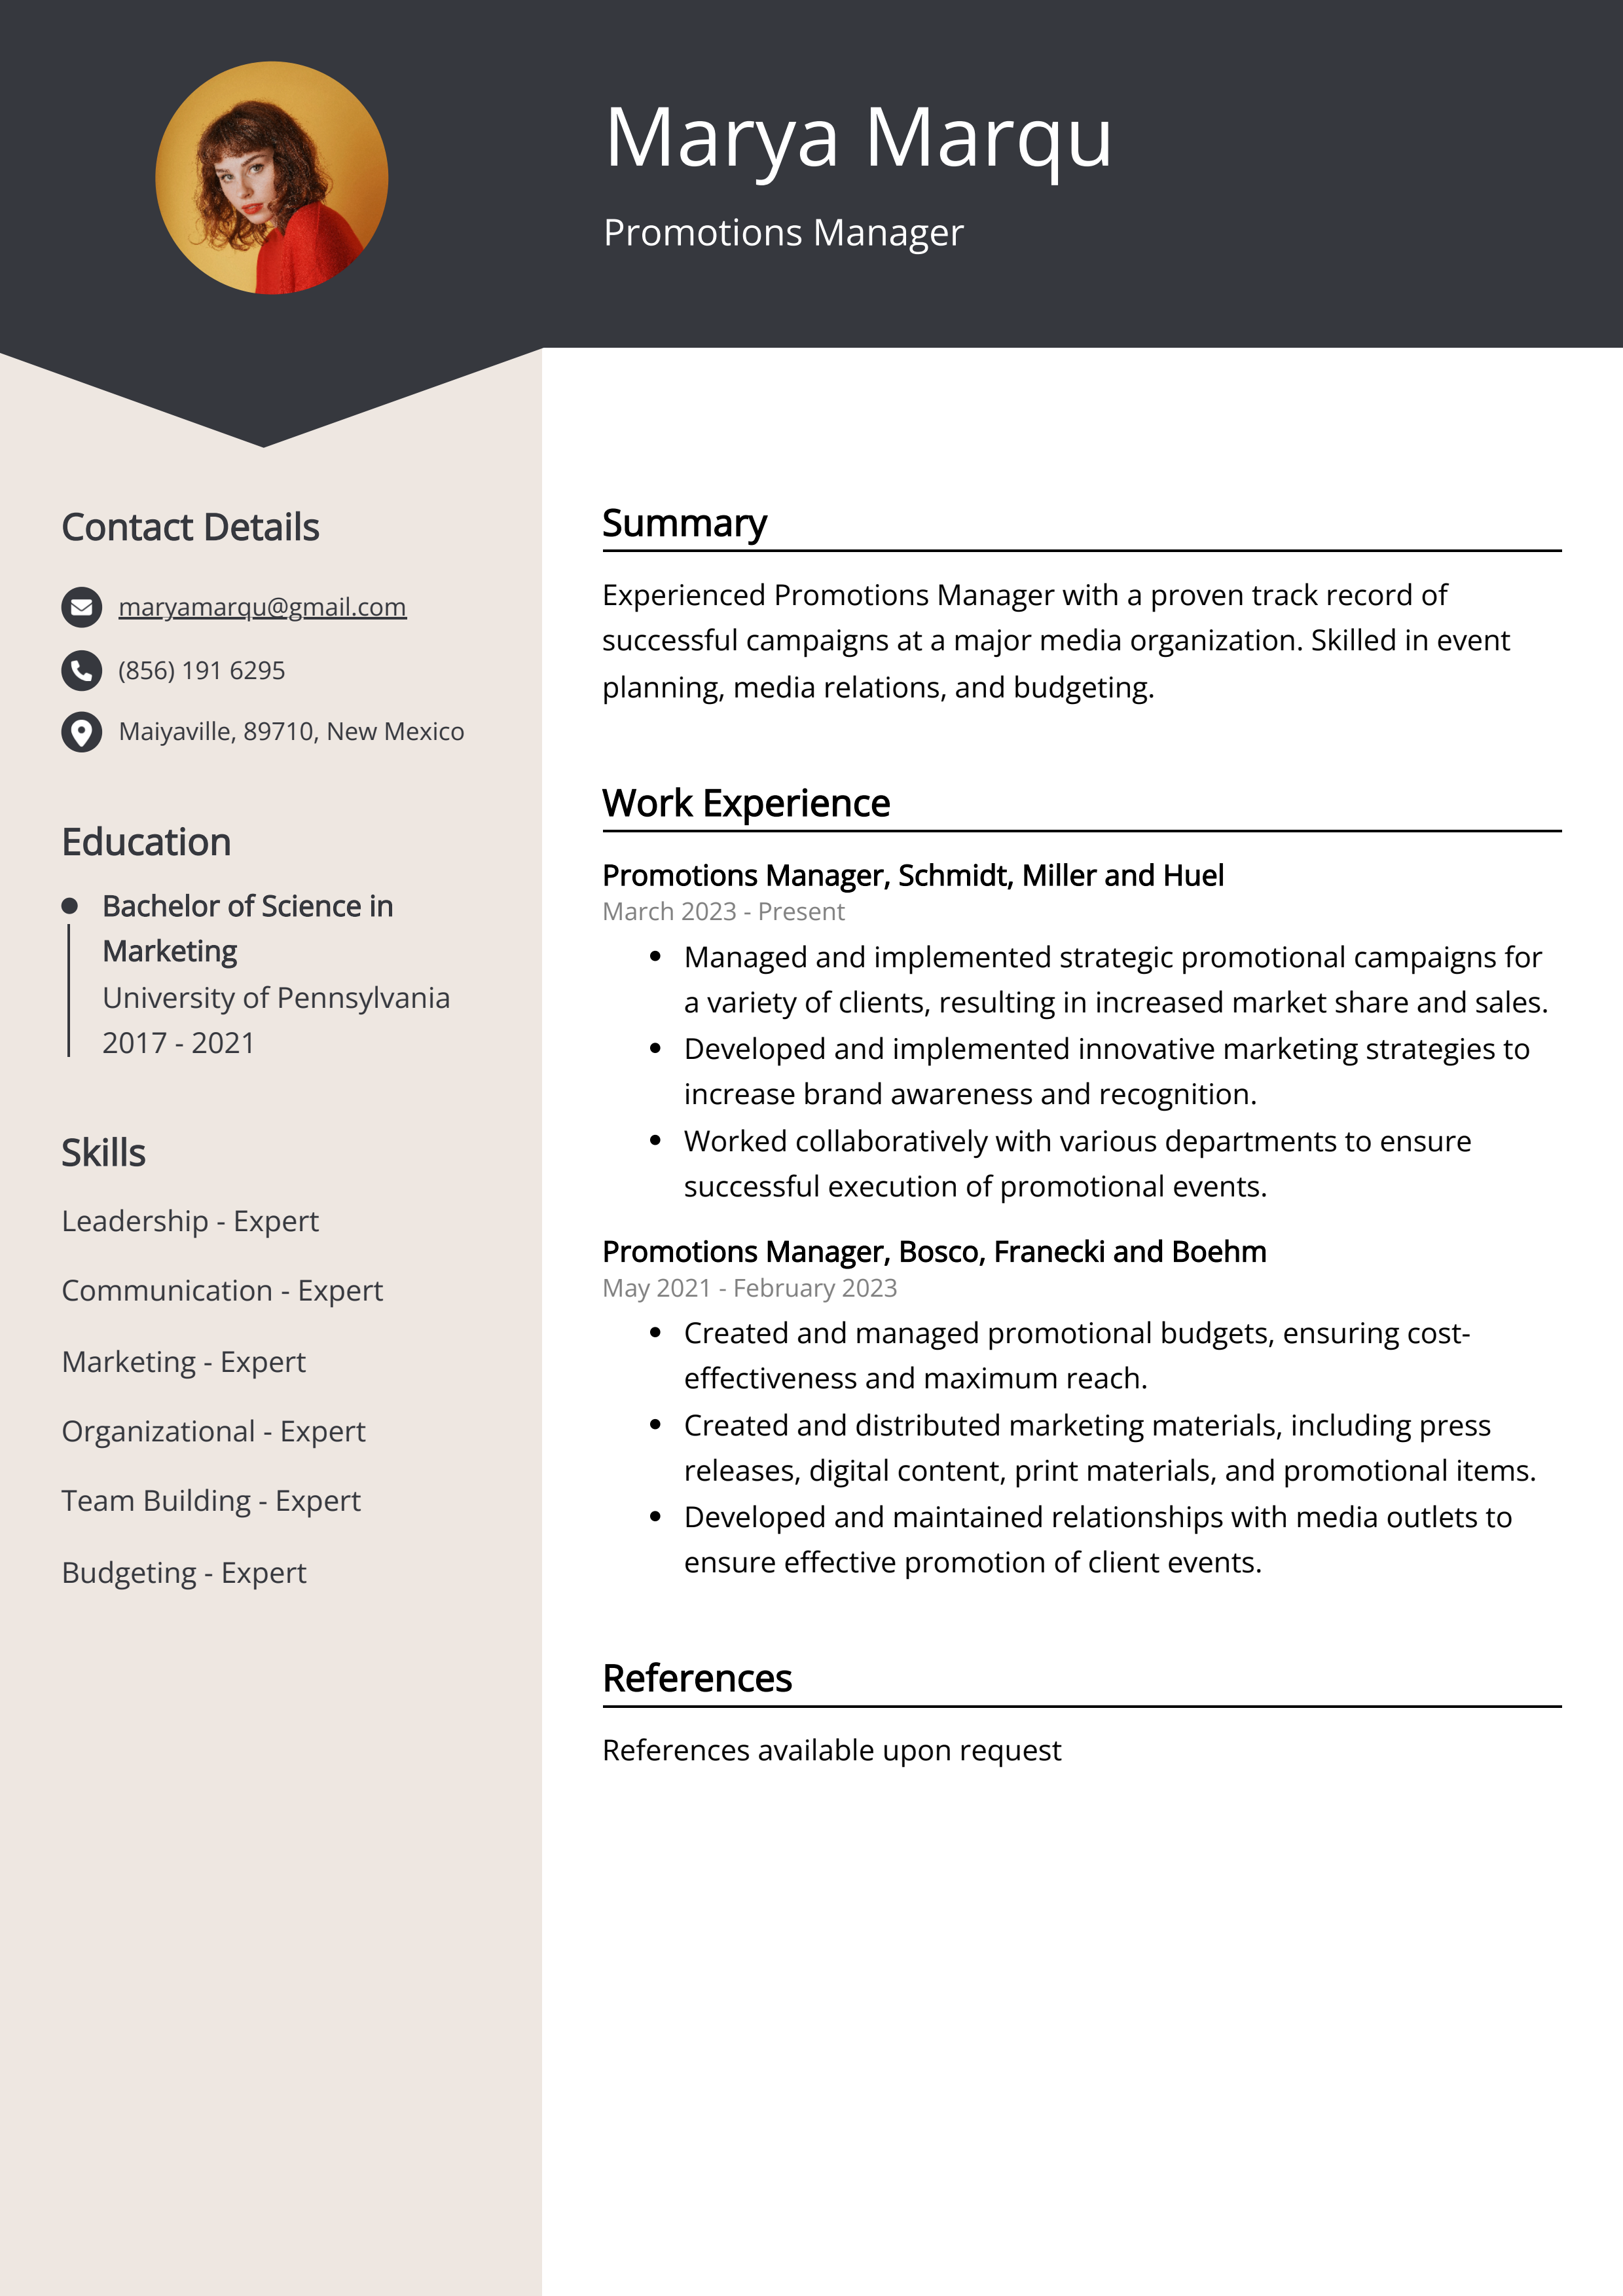 Promotions Manager CV Example